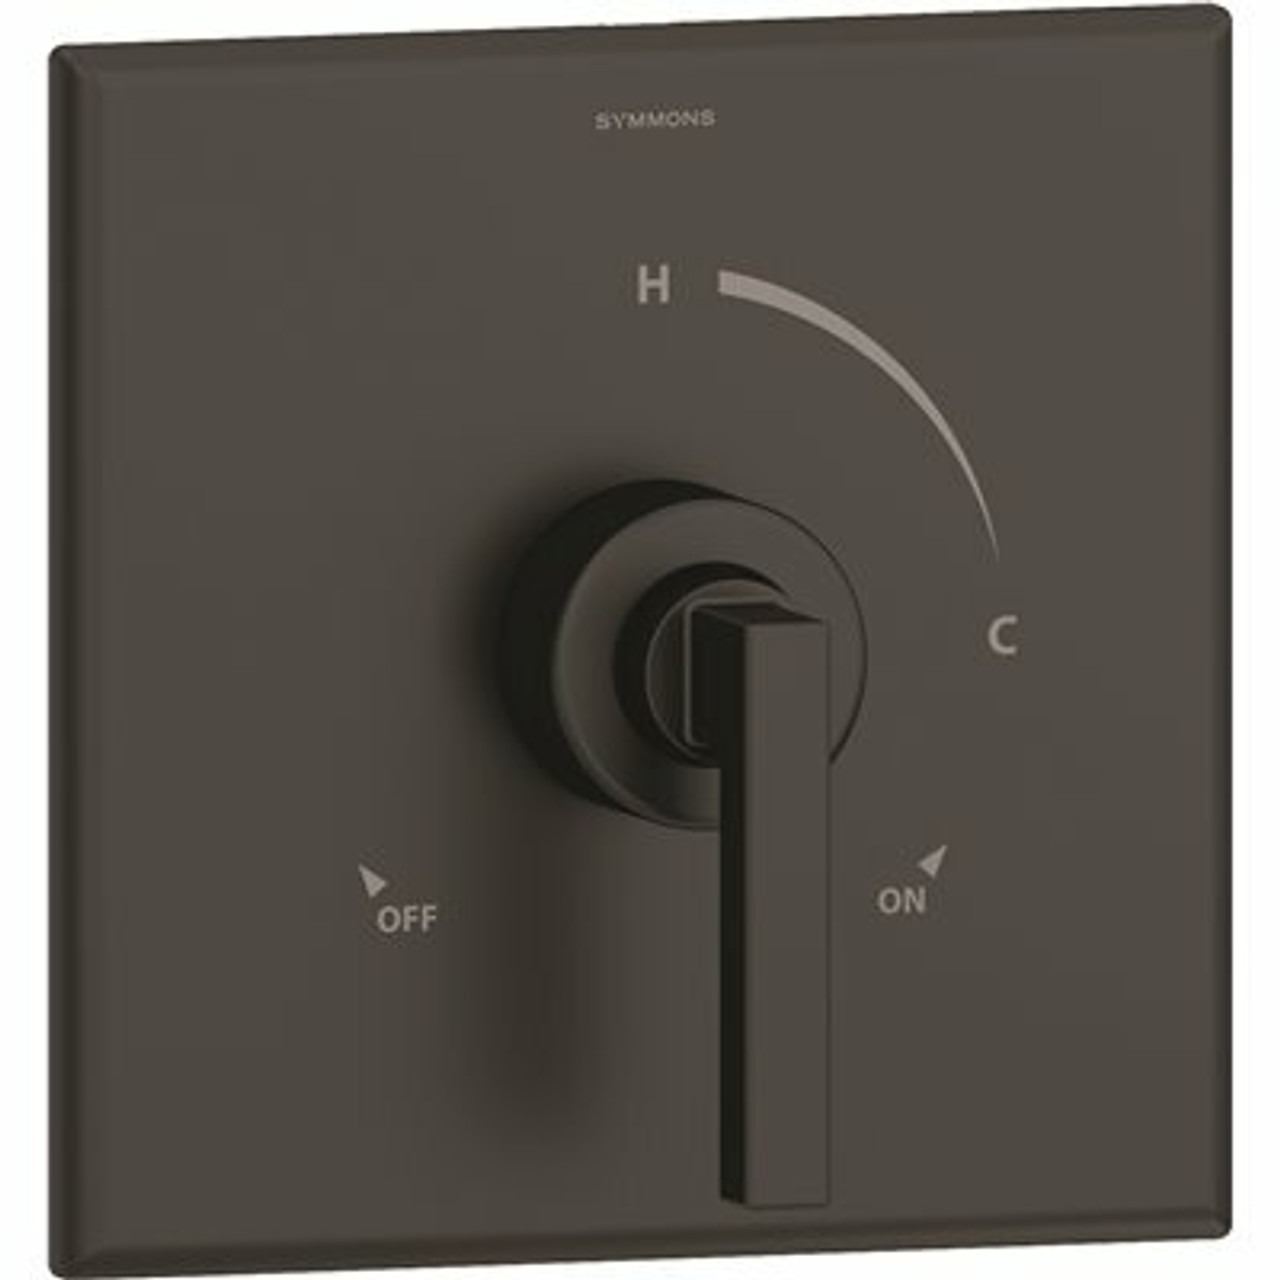 Symmons Duro 1-Handle Wall-Mounted Shower Valve Trim Kit In Matte Black (Valve Not Included)